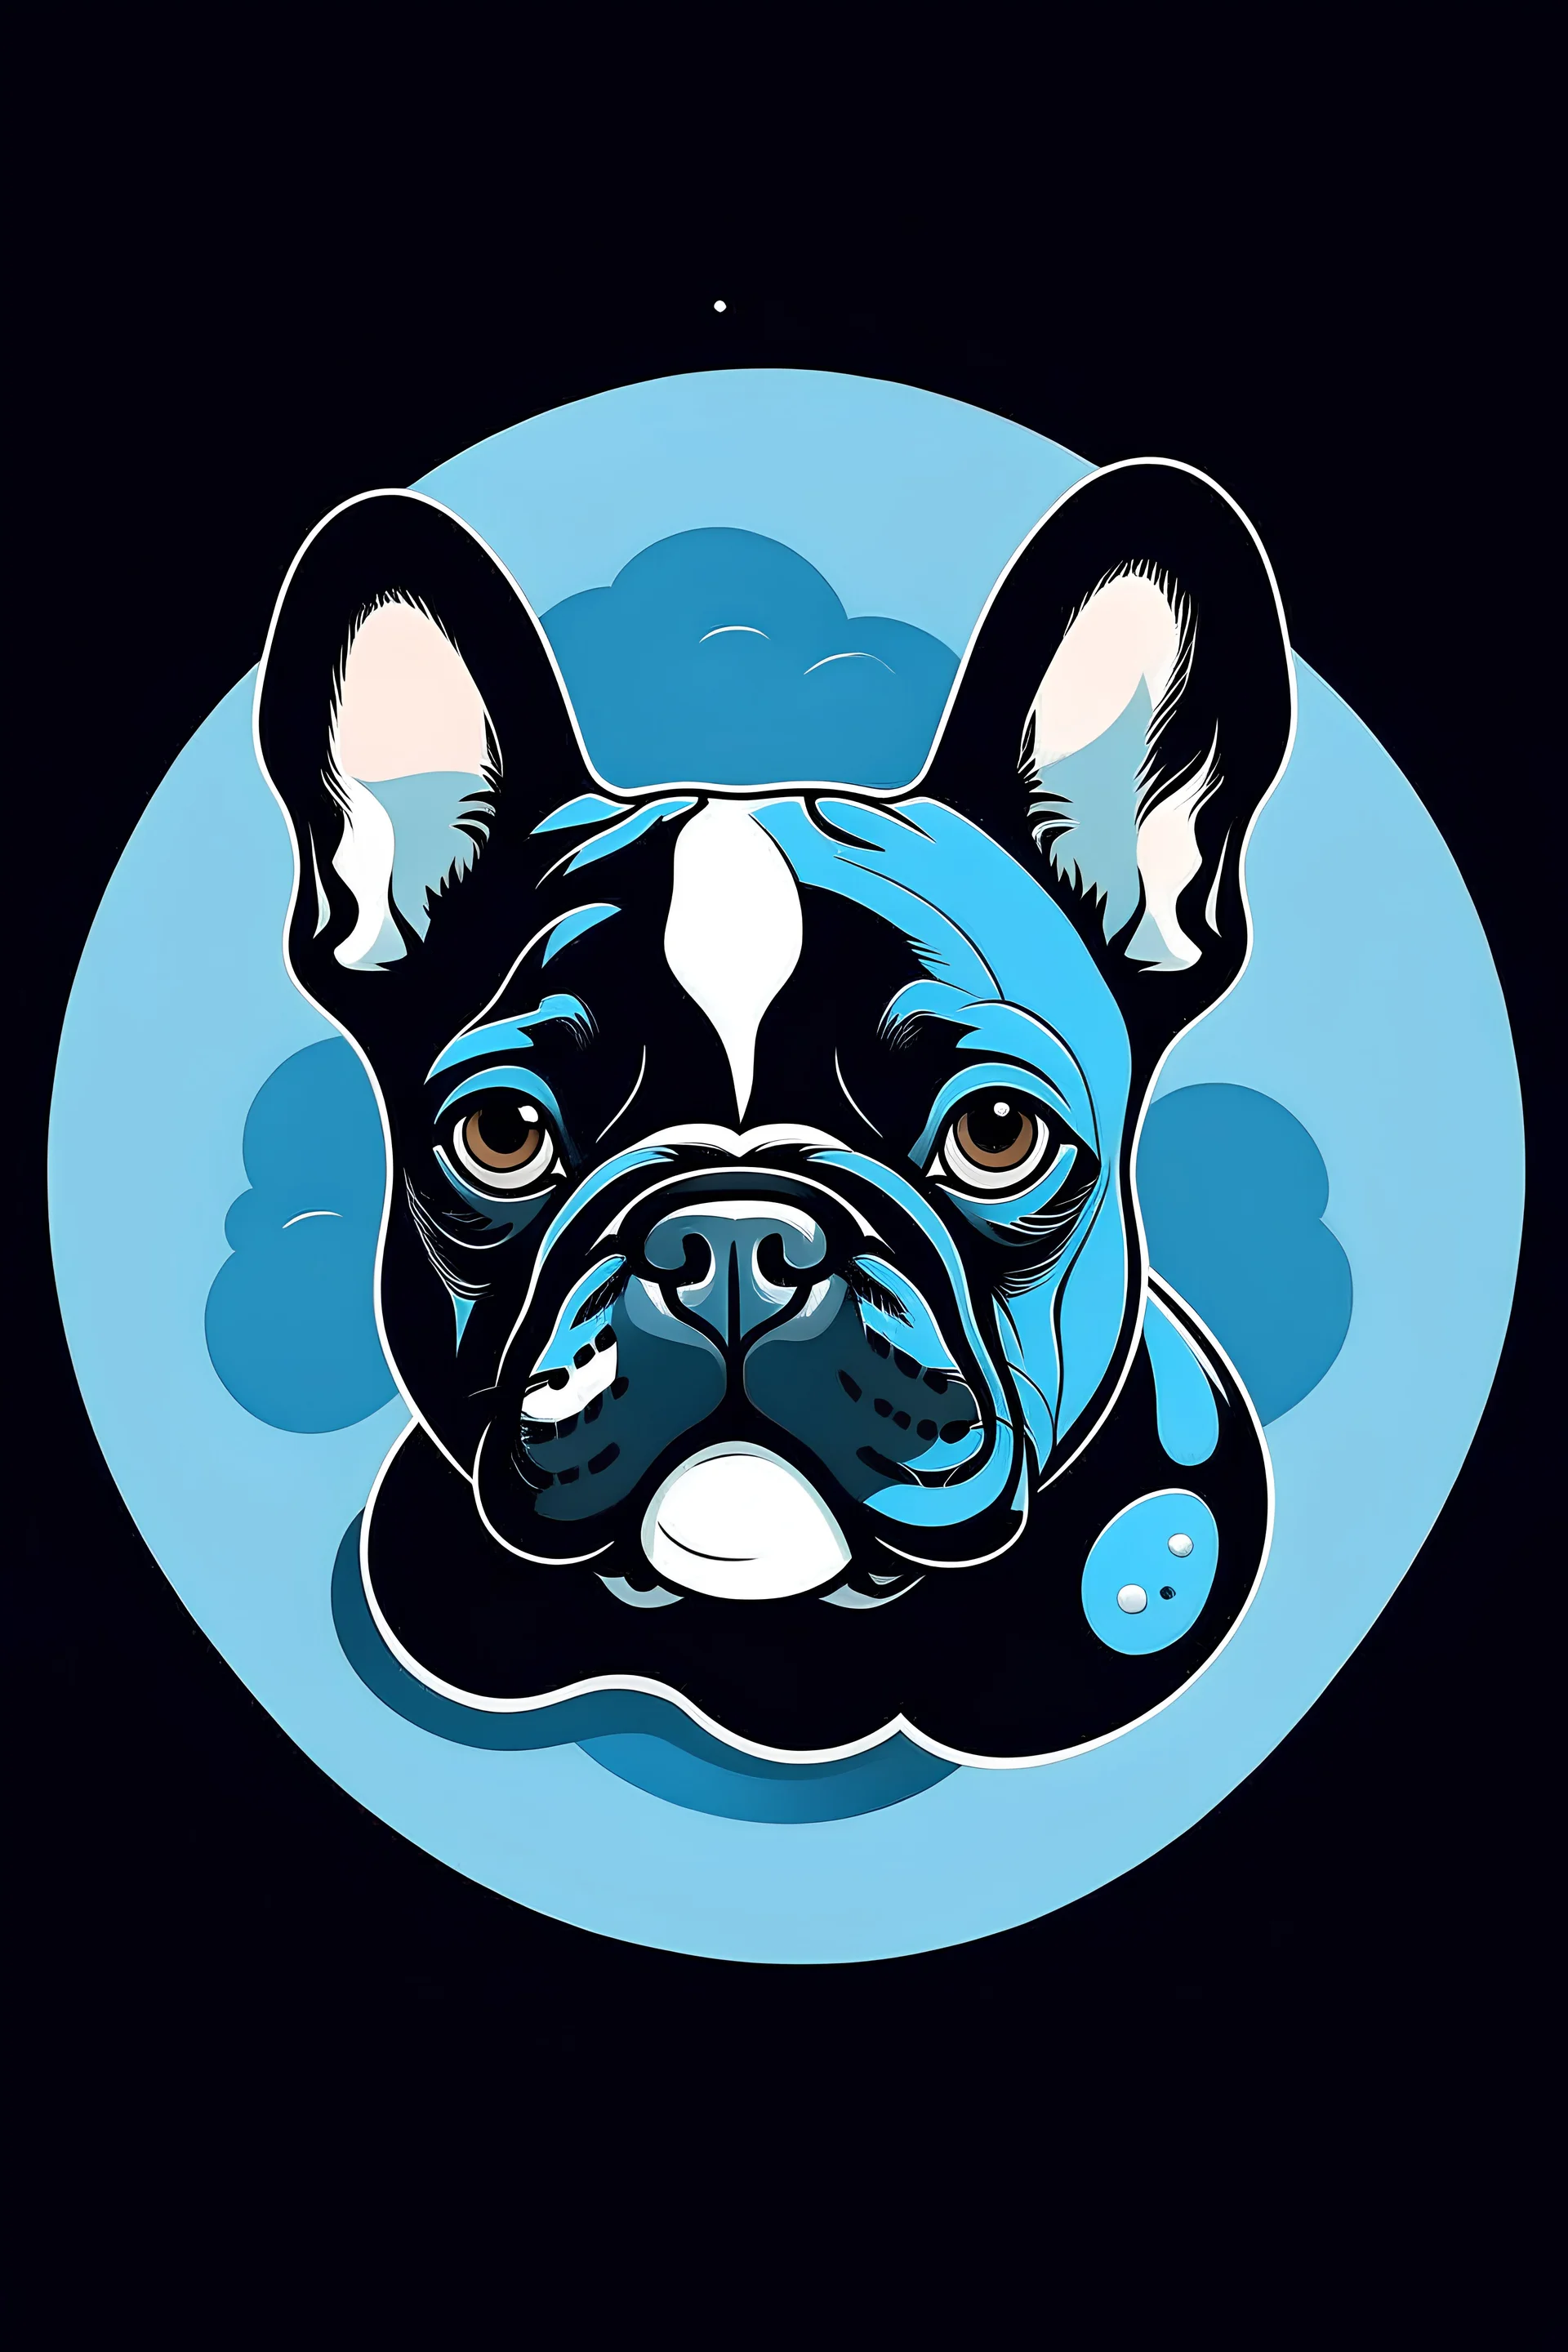 i want a logo for my french bulldog digital market app selling images and articles